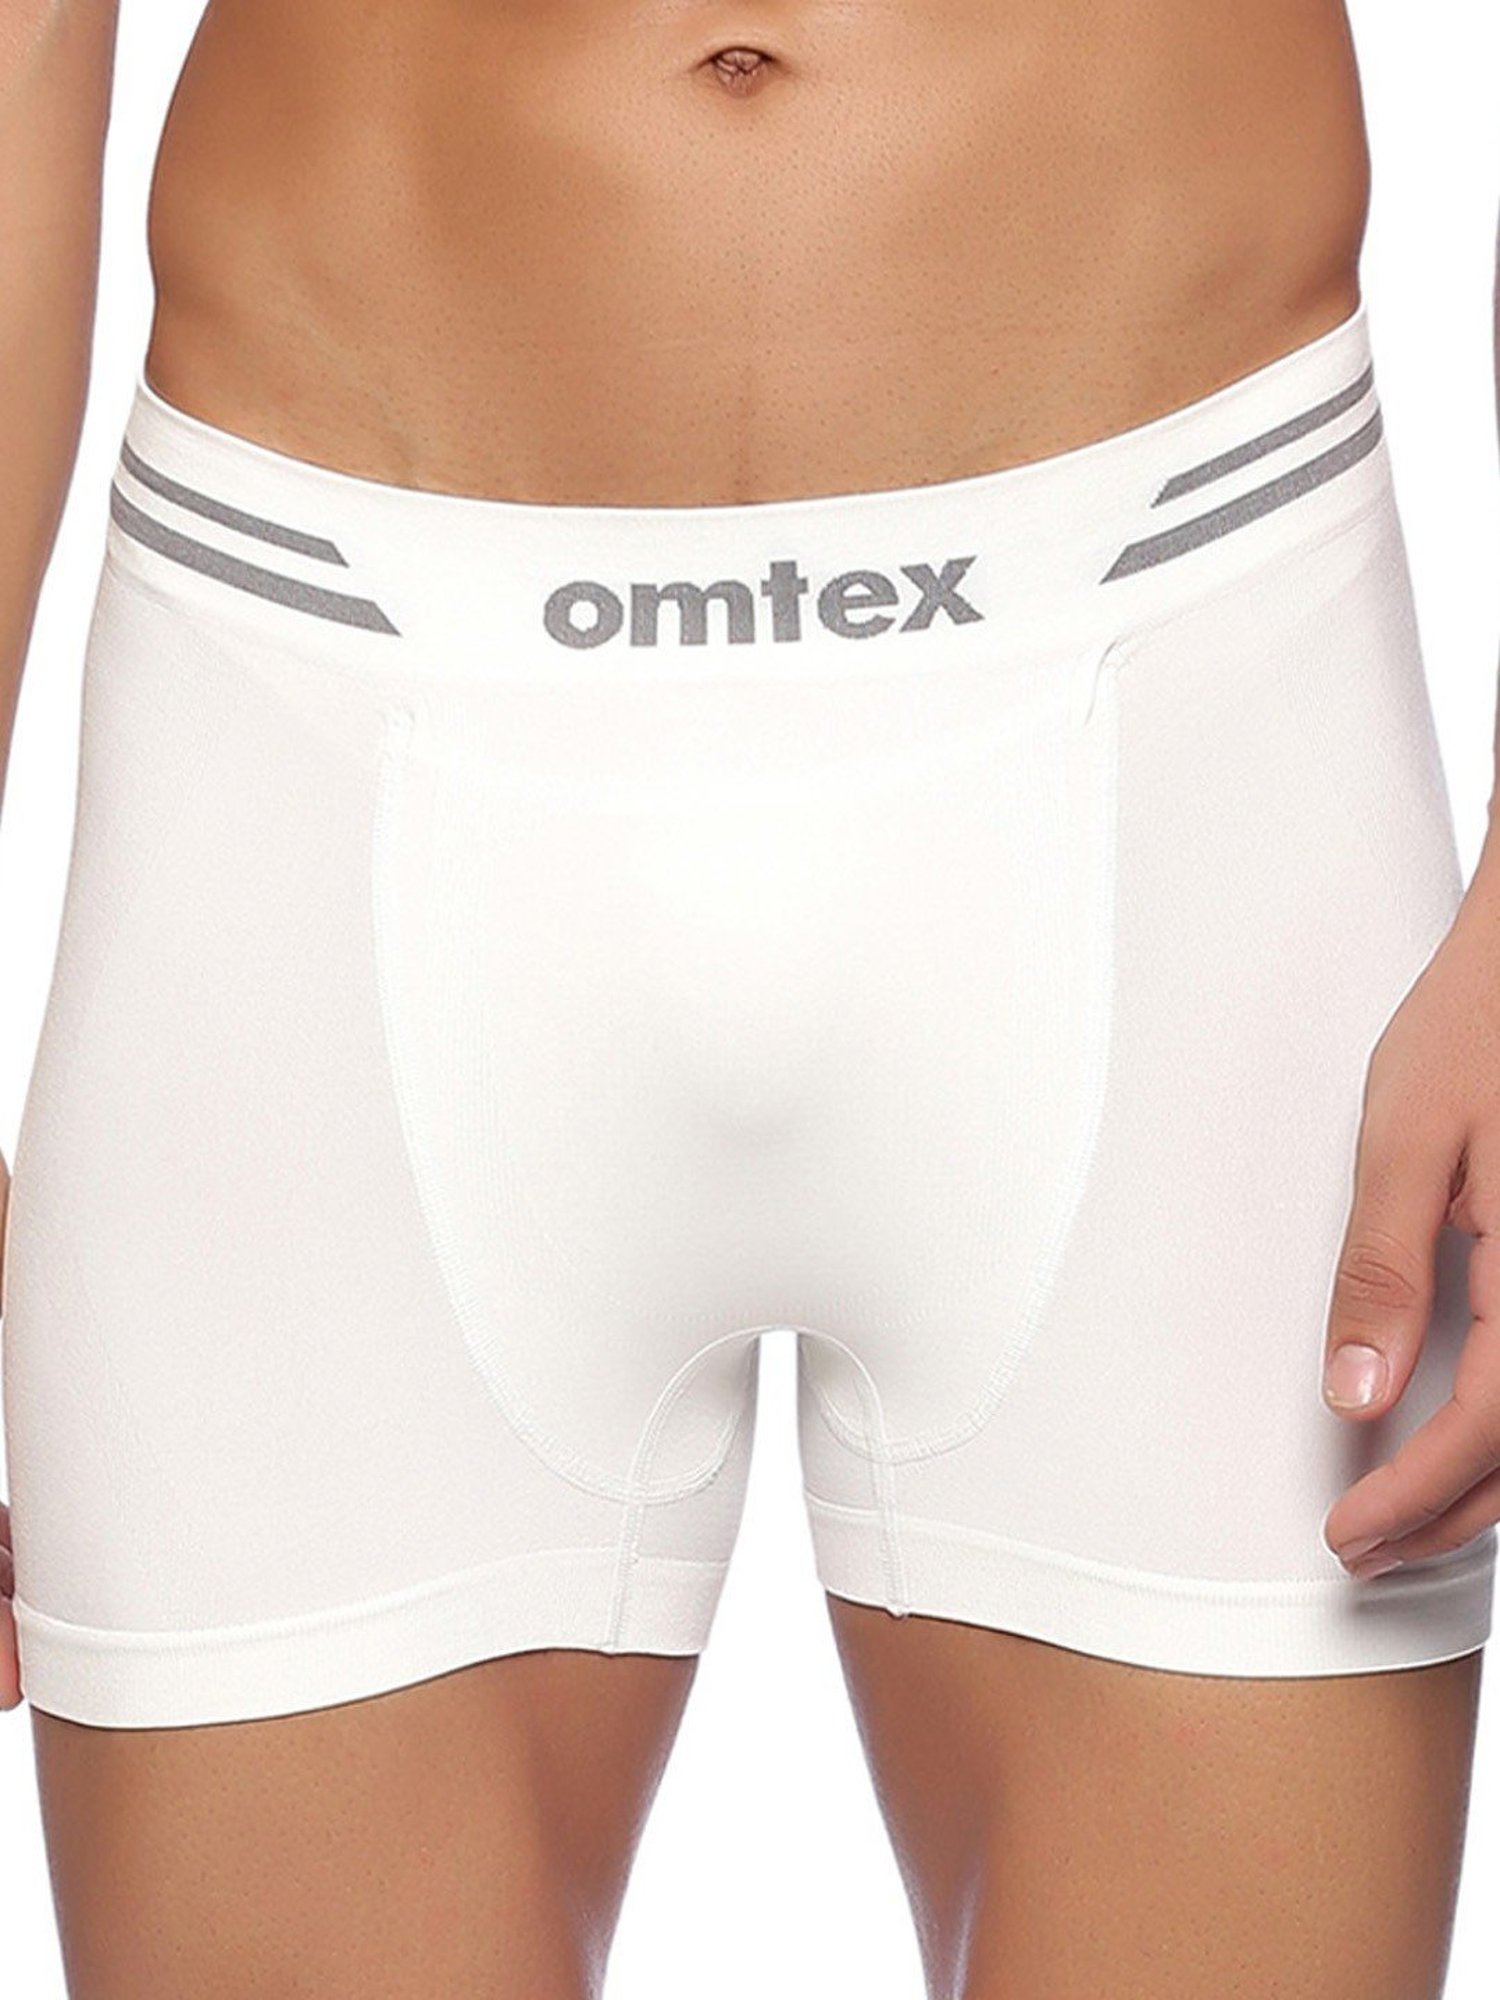 Omtex Men's Athletic Seamless Short Stretchable Pack of 2 (White) Size - XS